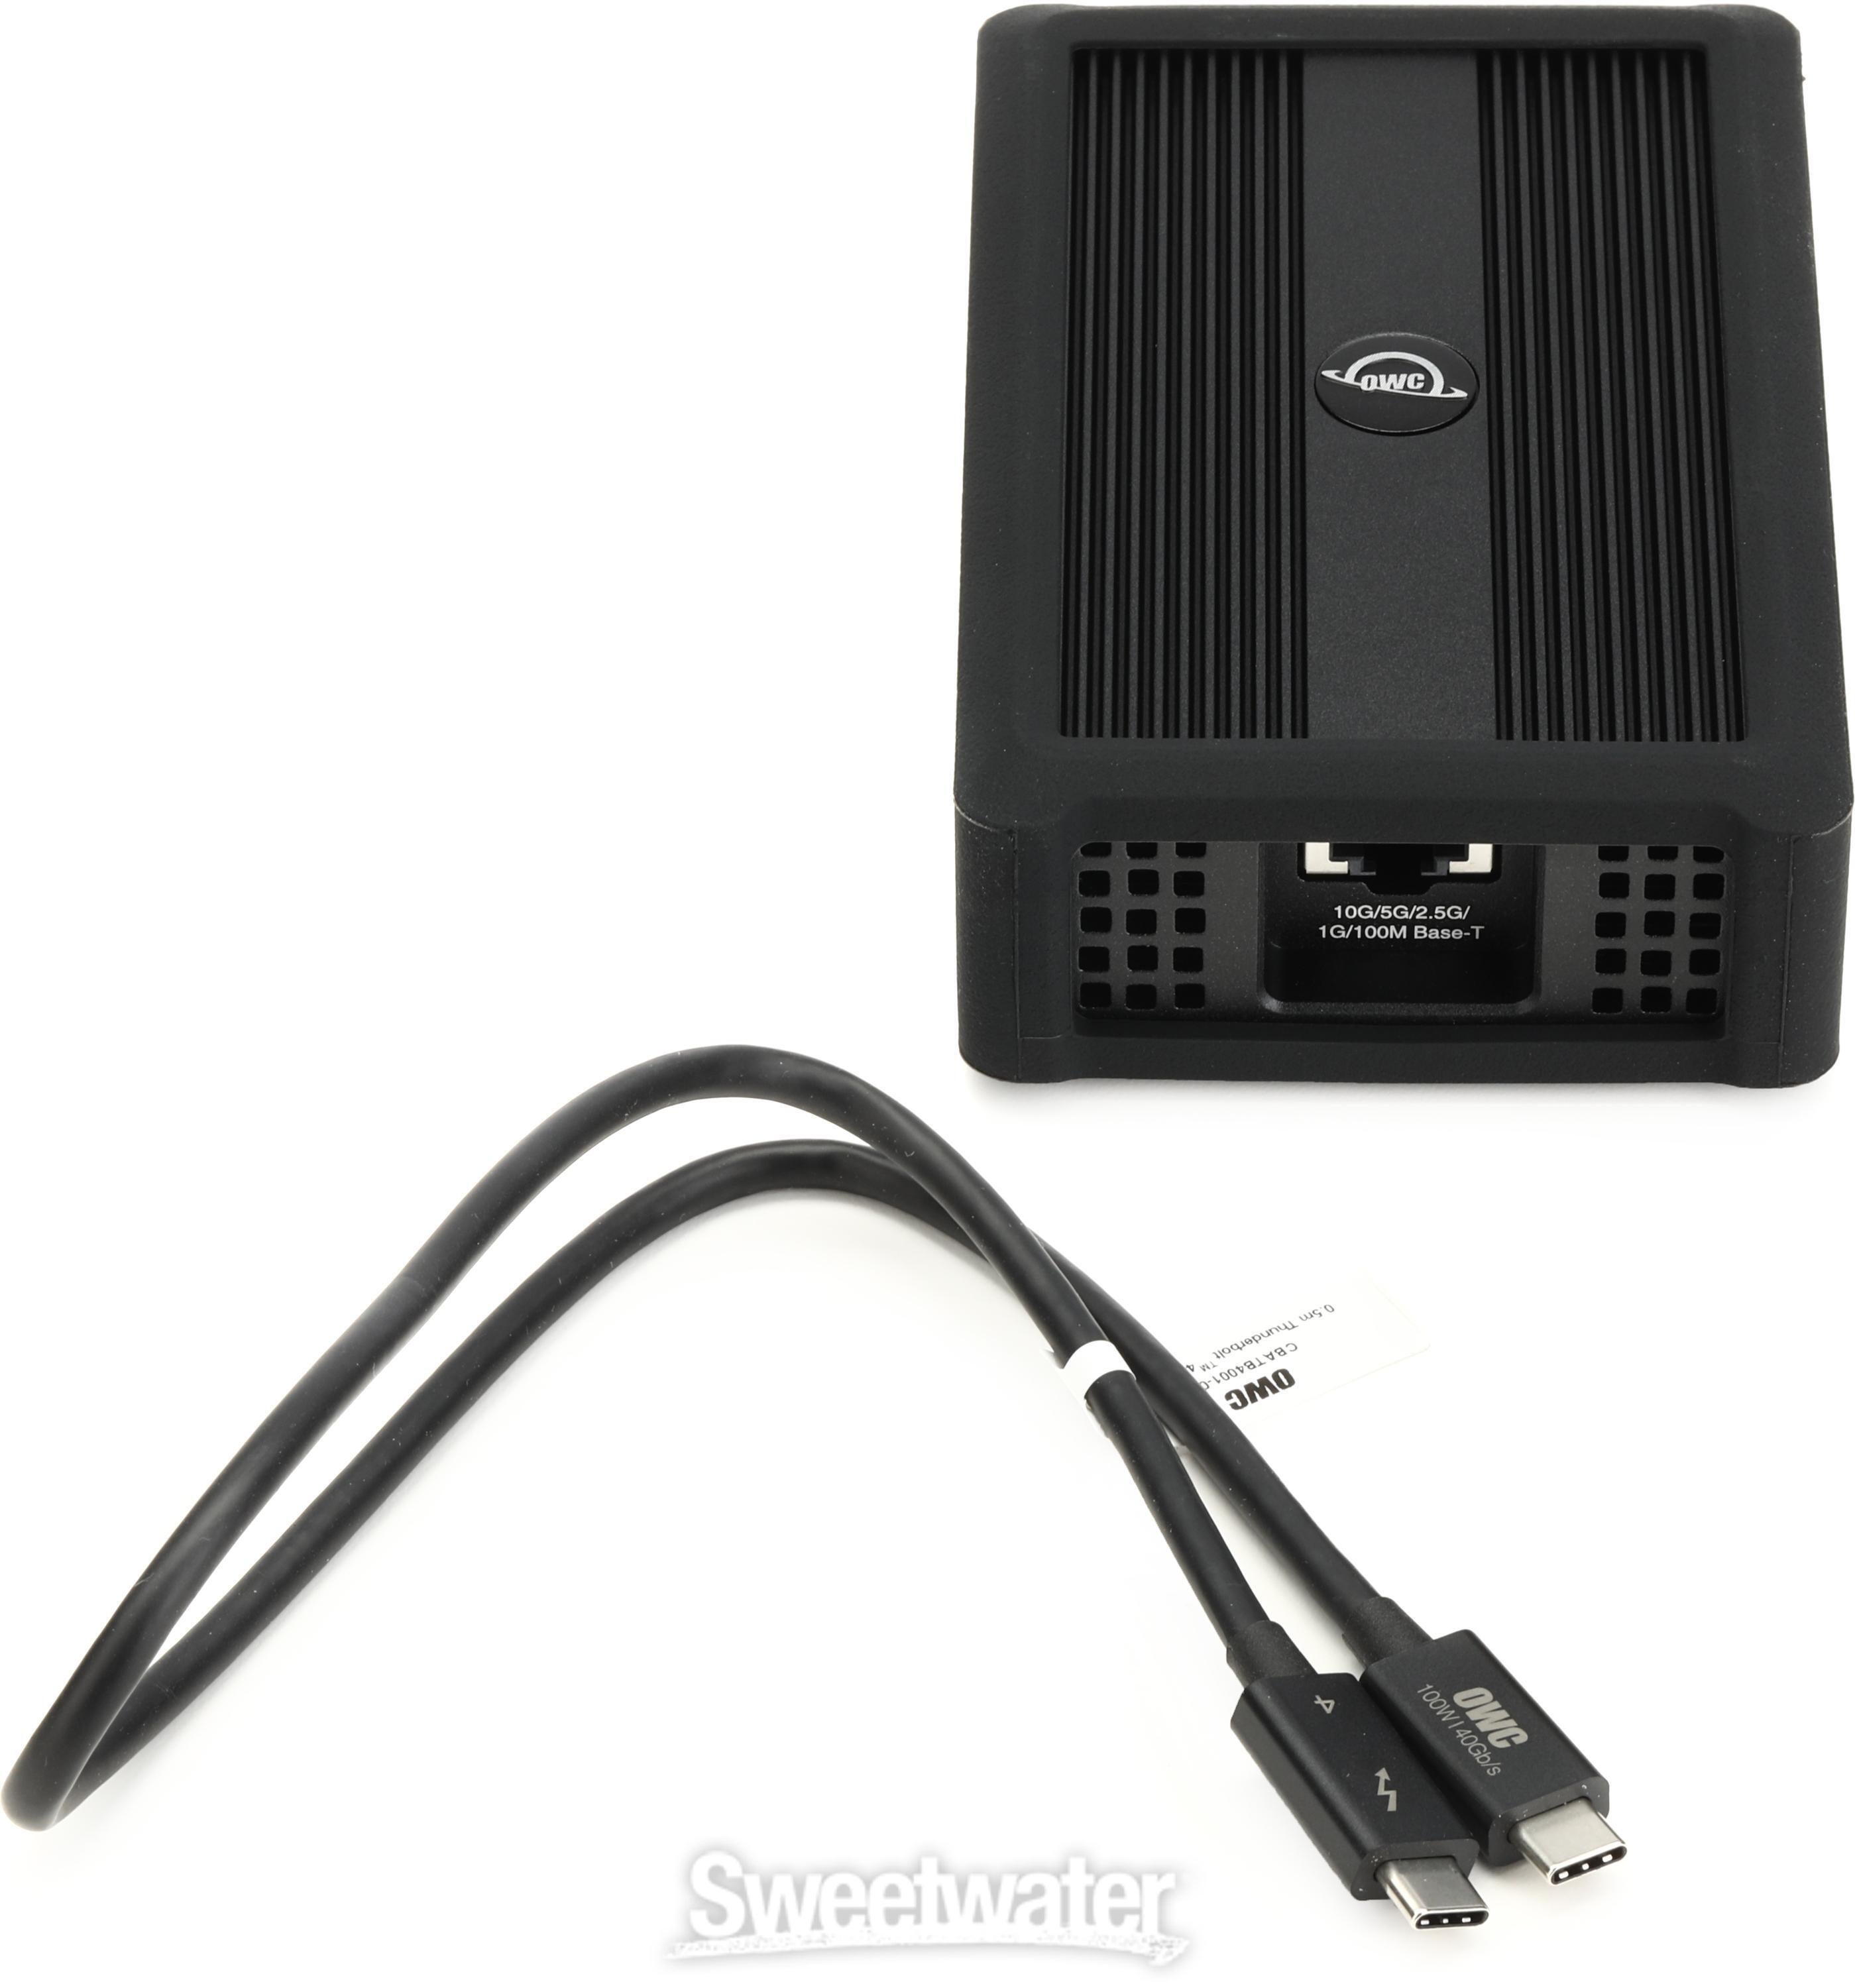 OWC Thunderbolt 3 10G Ethernet Adapter | Sweetwater